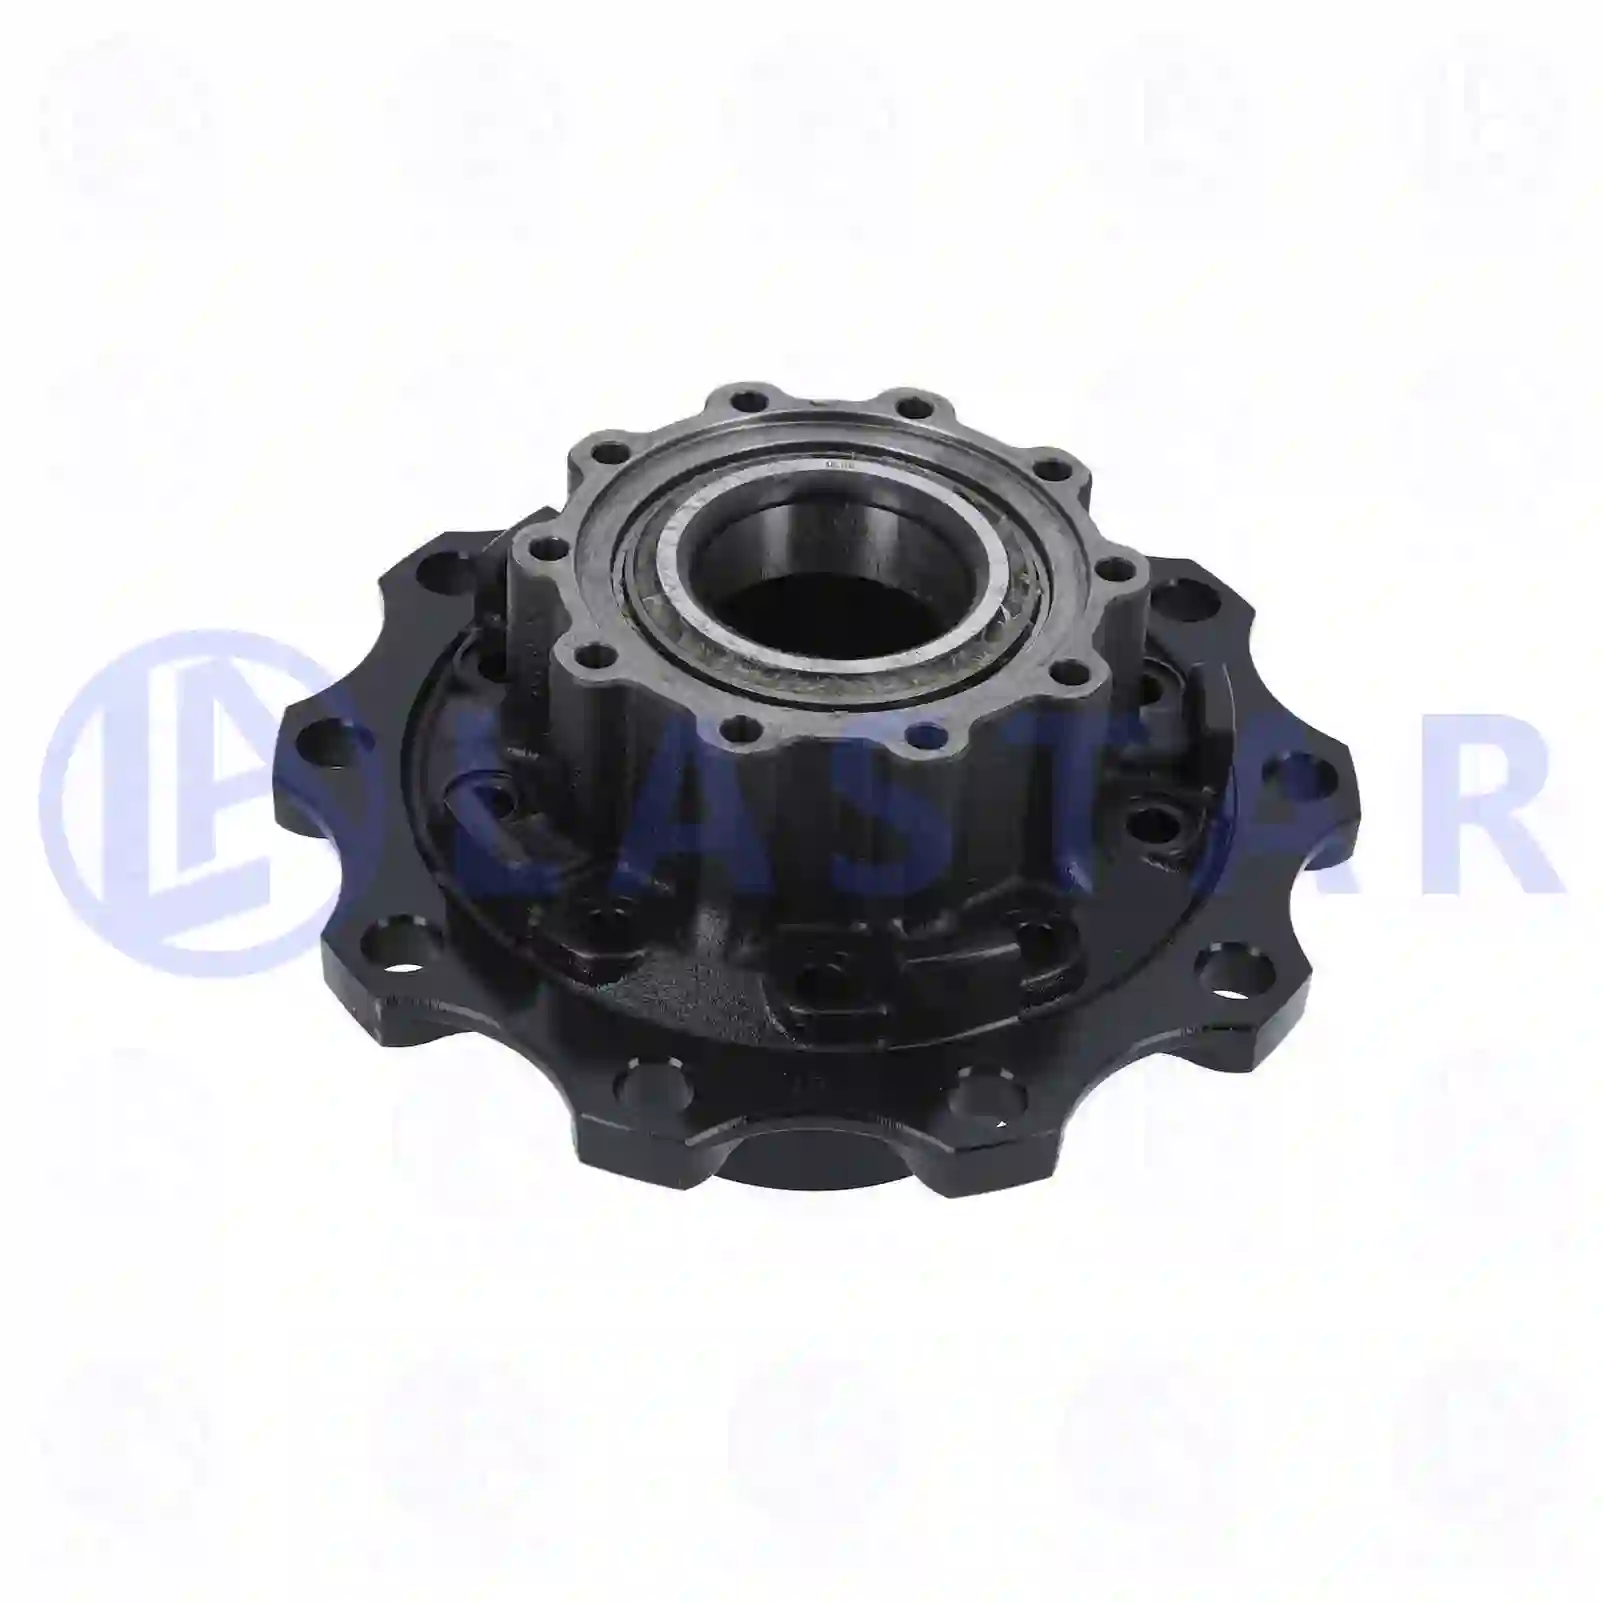  Wheel hub, with bearing, without ABS ring || Lastar Spare Part | Truck Spare Parts, Auotomotive Spare Parts